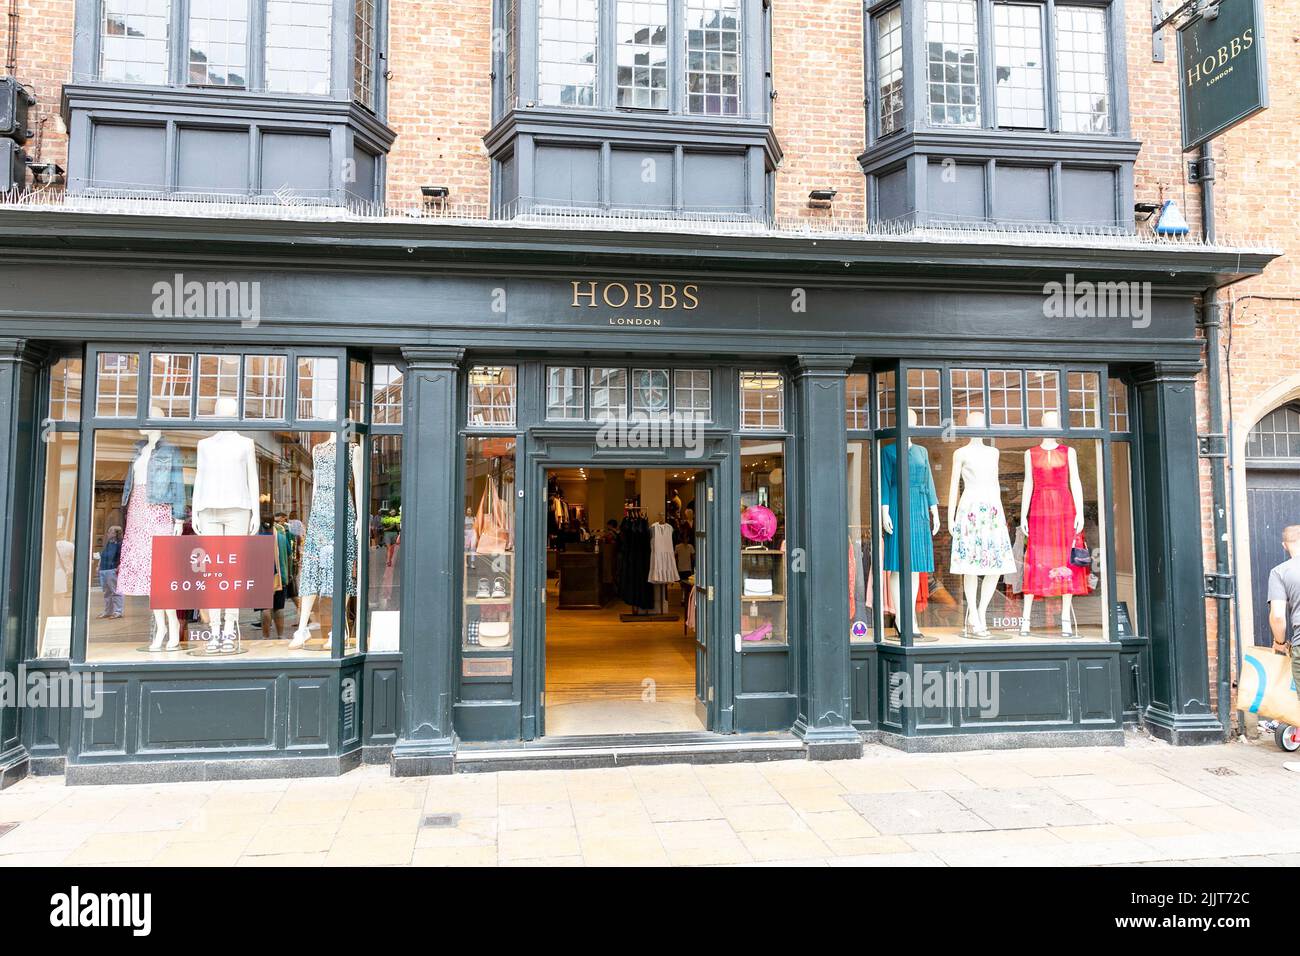 Hobbs clothing store in historic York city centre, exterior of clothing store,Yorkshire,England,Uk Stock Photo